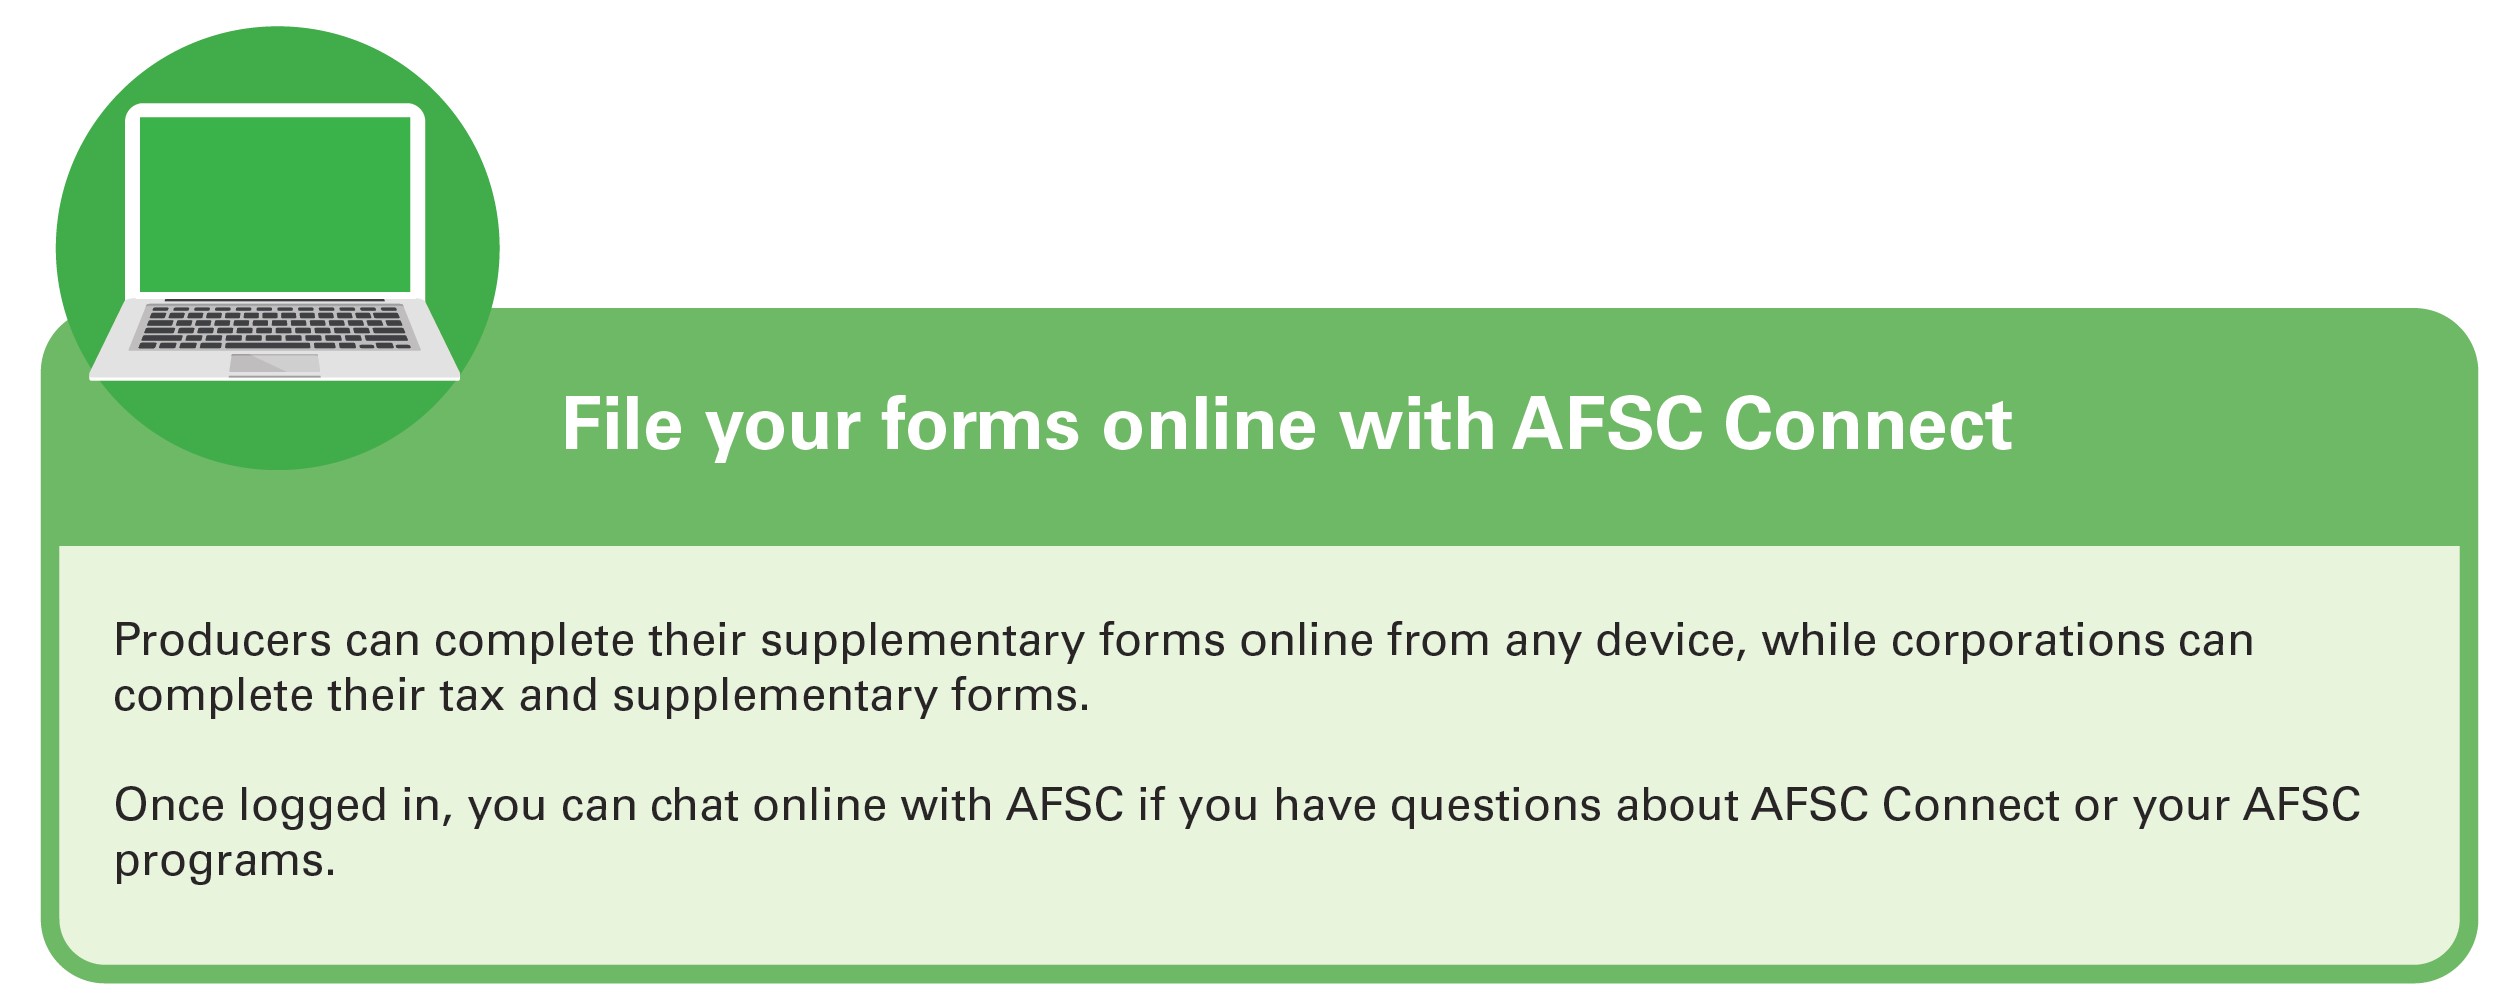 File your forms online with AFSC Connect. Producers can complete their supplementary forms online from any device, while corporations can complete their tax and supplementary forms. Once logged in, you can chat online with AFSC if you have questions about AFSC Connect or your AFSC programs.